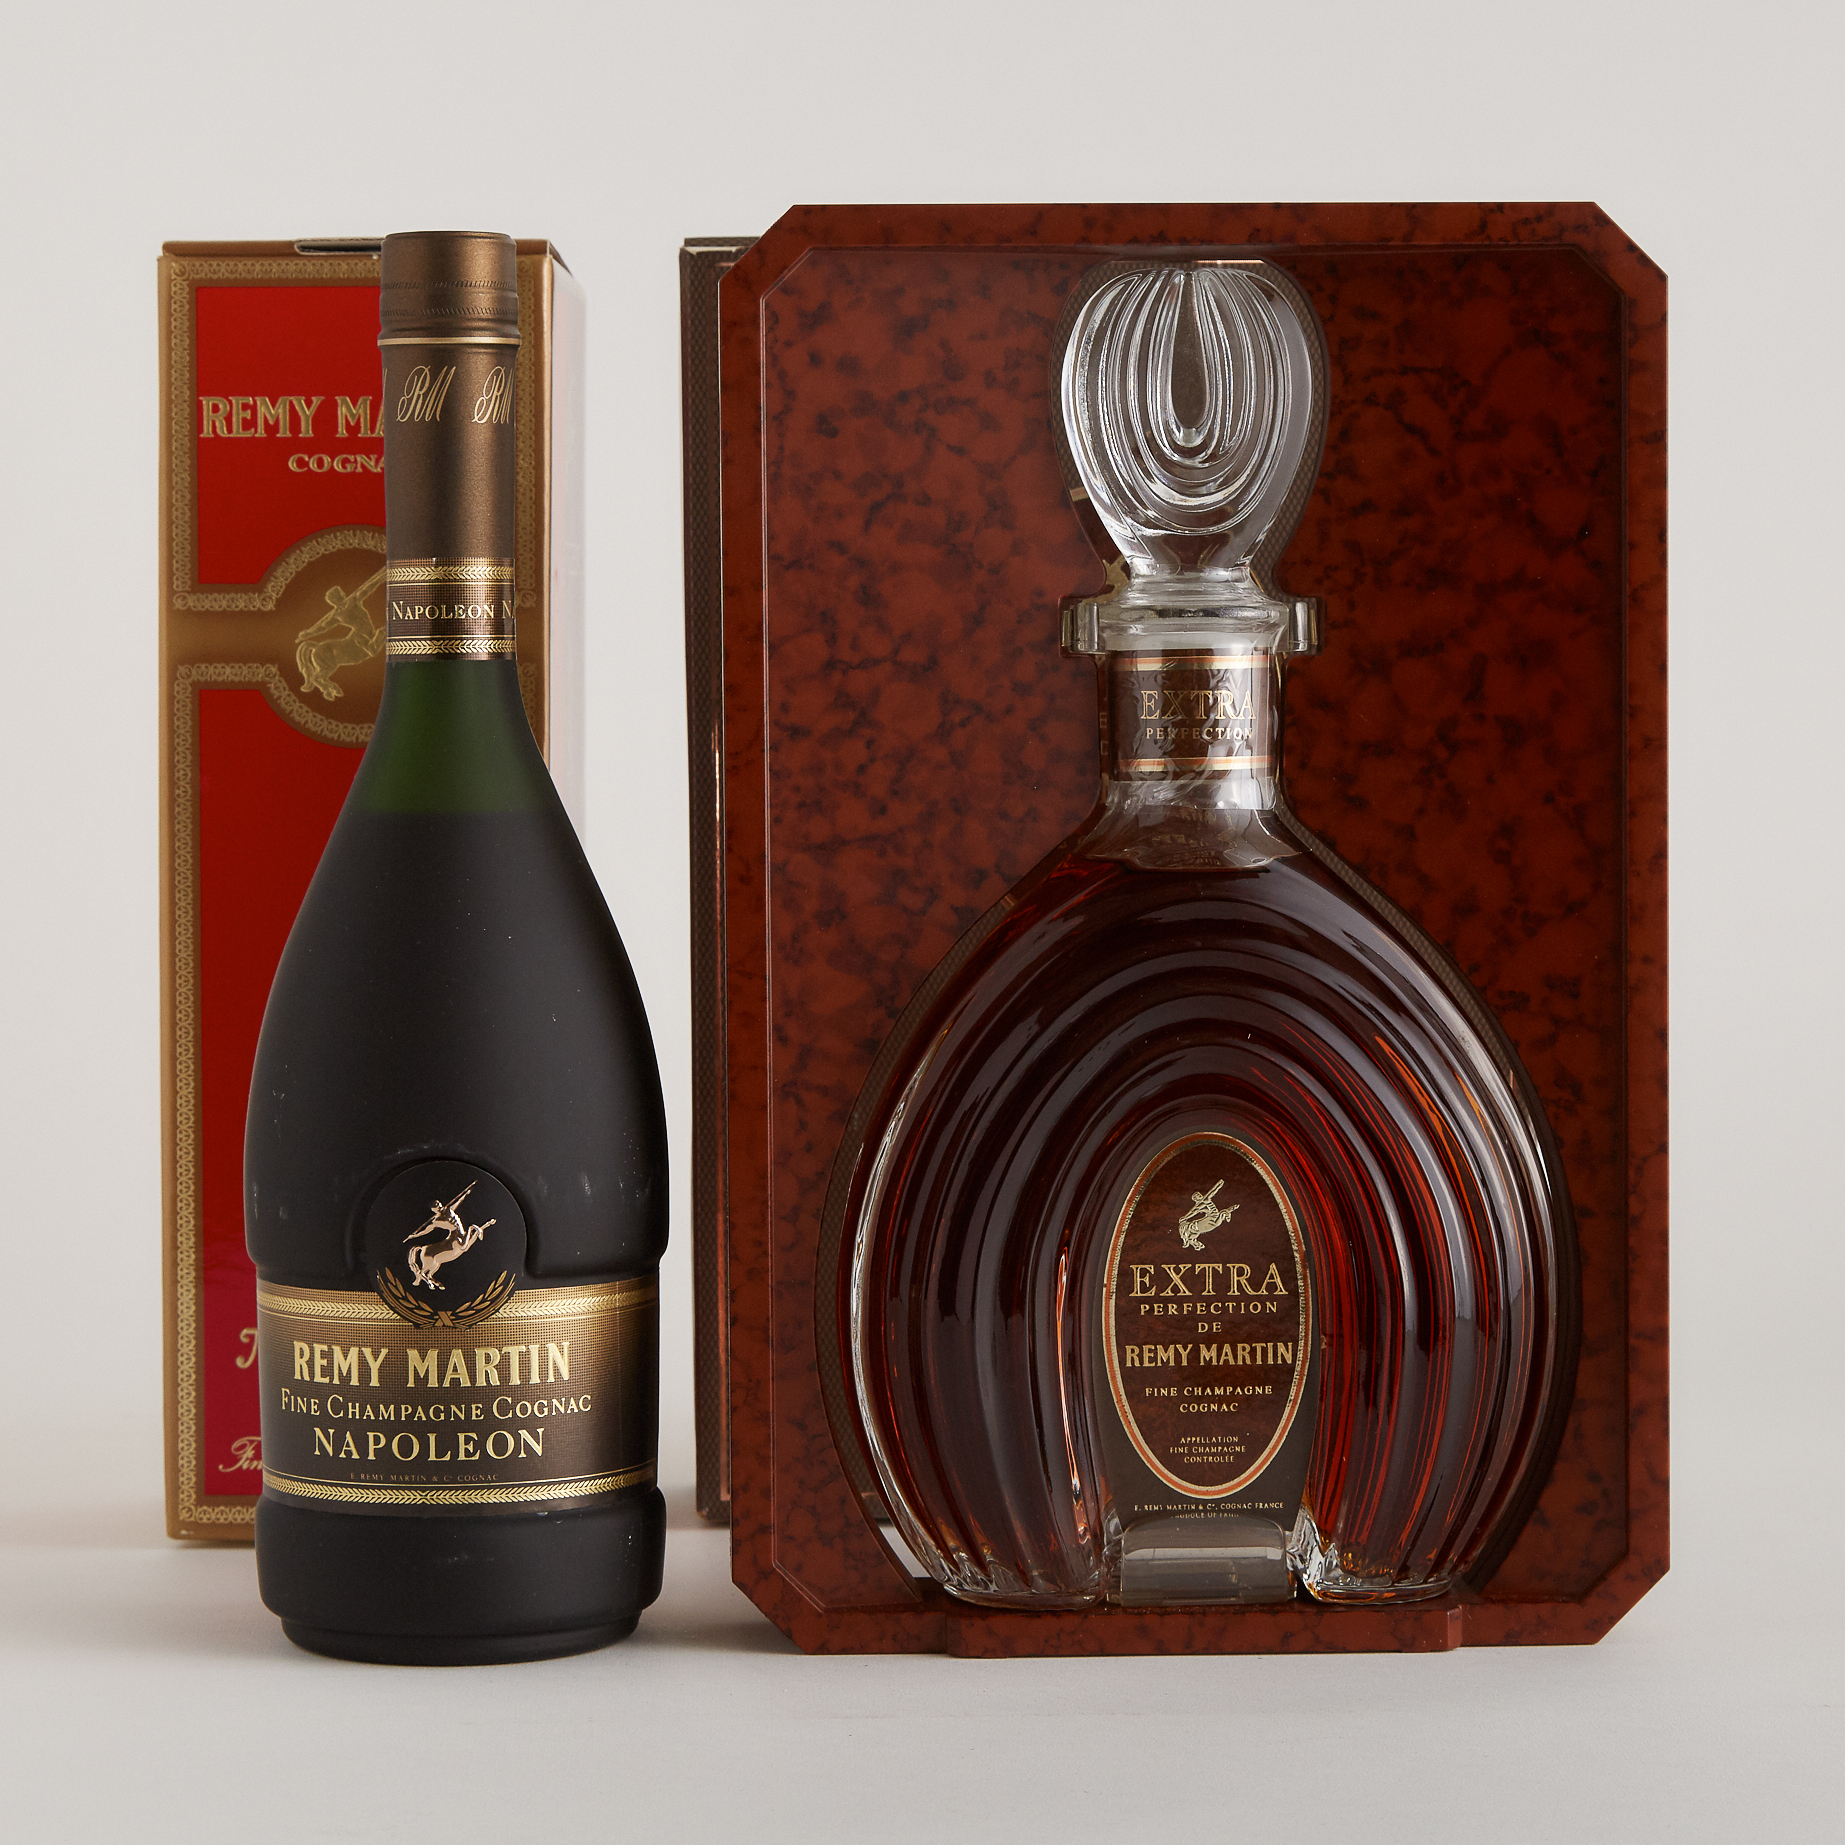 RÉMY MARTIN EXTRA PERFECTION FINE CHAMPAGNE COGNAC (ONE 0.7 L)
RÉMY MARTIN FINE CHAMPAGNE COGNAC (ONE 0.7 L)